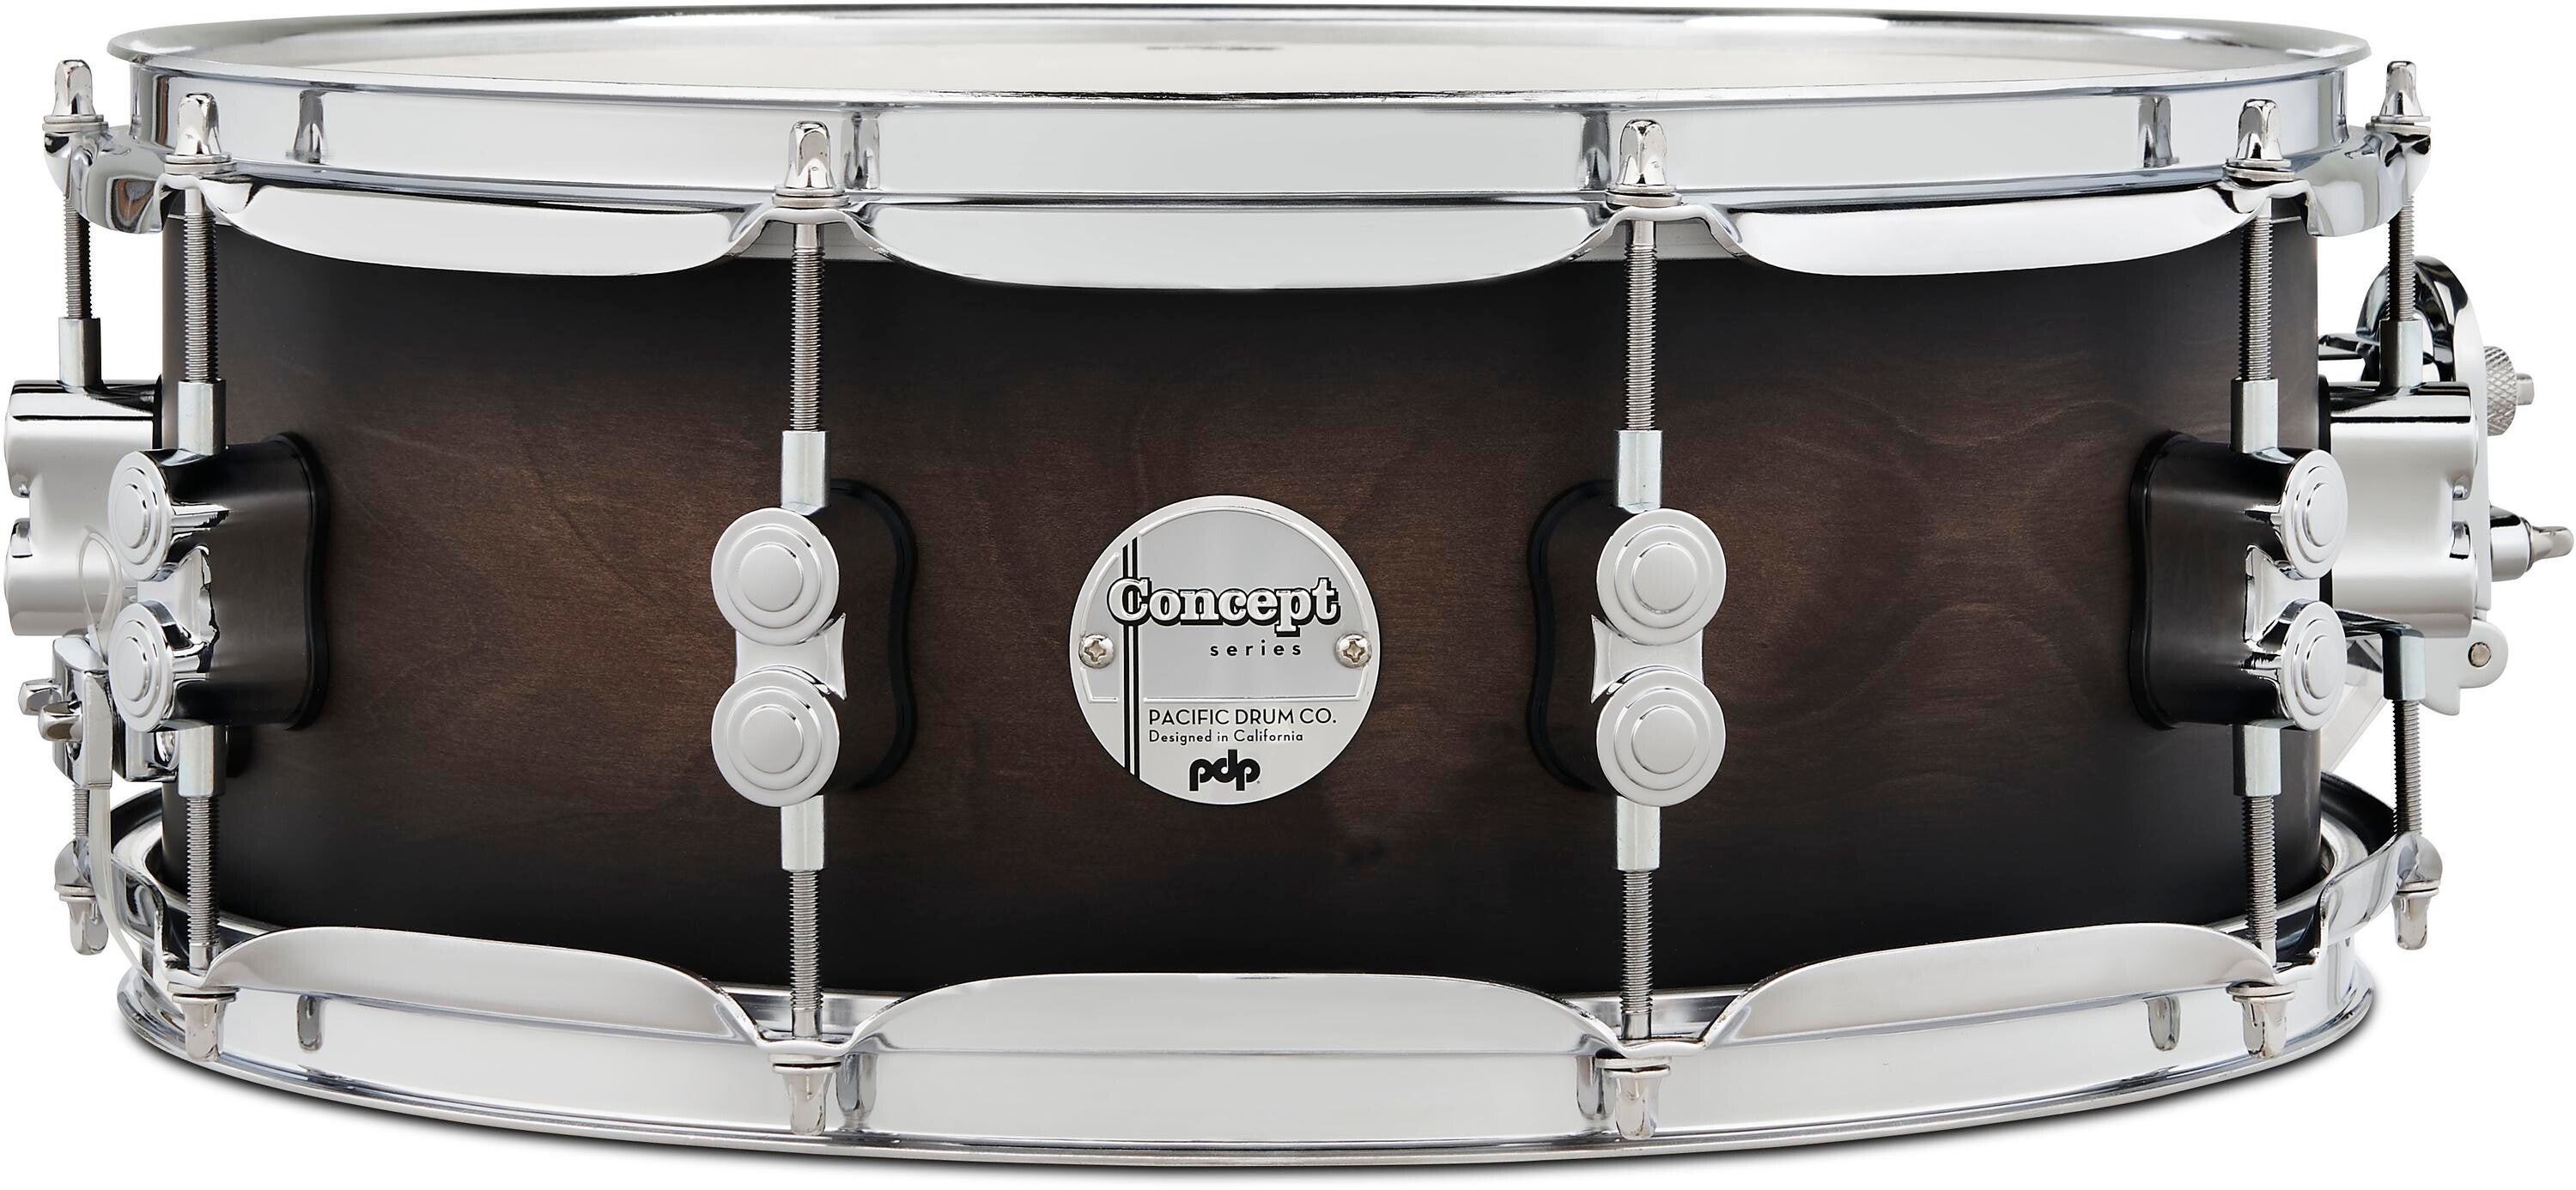 Concept Maple Snare Drum - 5.5 x 14 inch - Satin Charcoal Burst